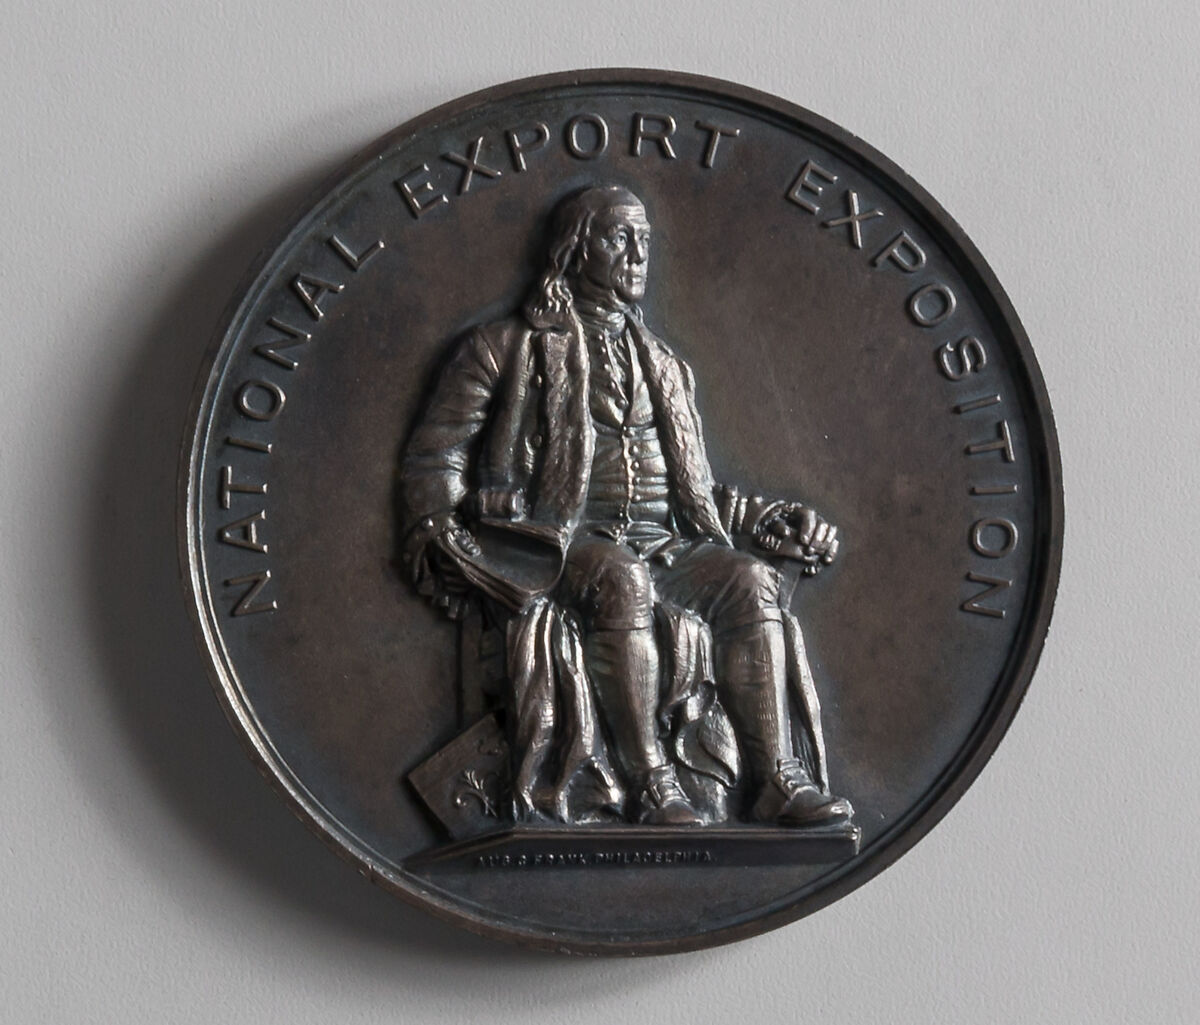 Award of National Export Exposition, Augustus C. Frank, White metal, American 